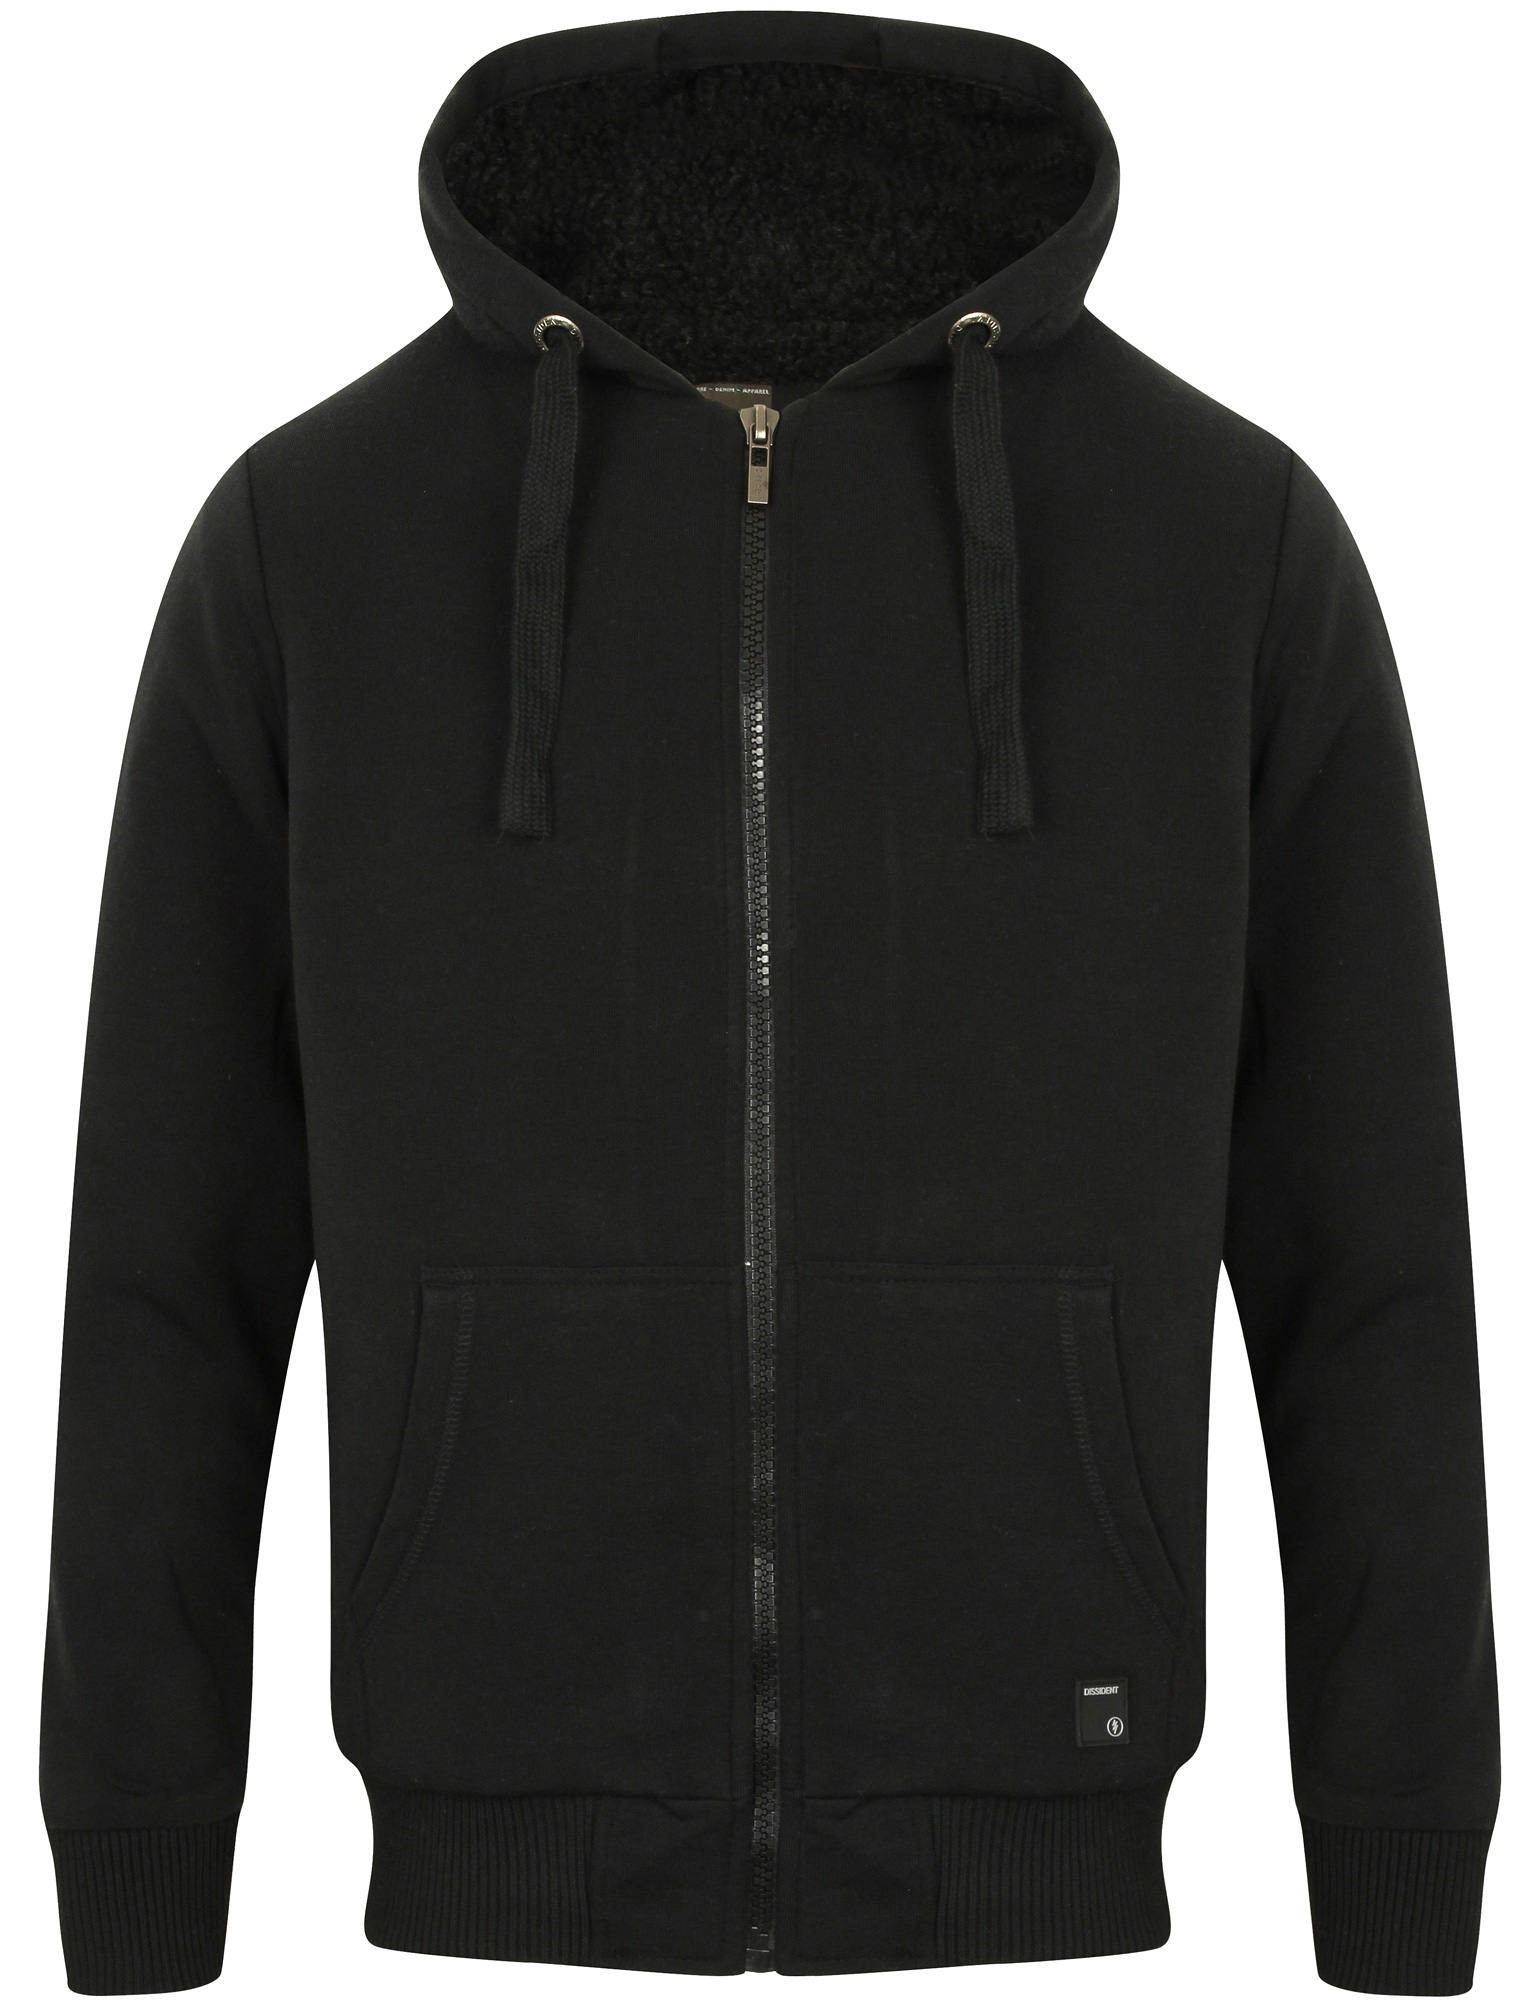 Dissident Men's Fleece Hoodie Borg Lined Hooded Top Thick Winter Hoody ...